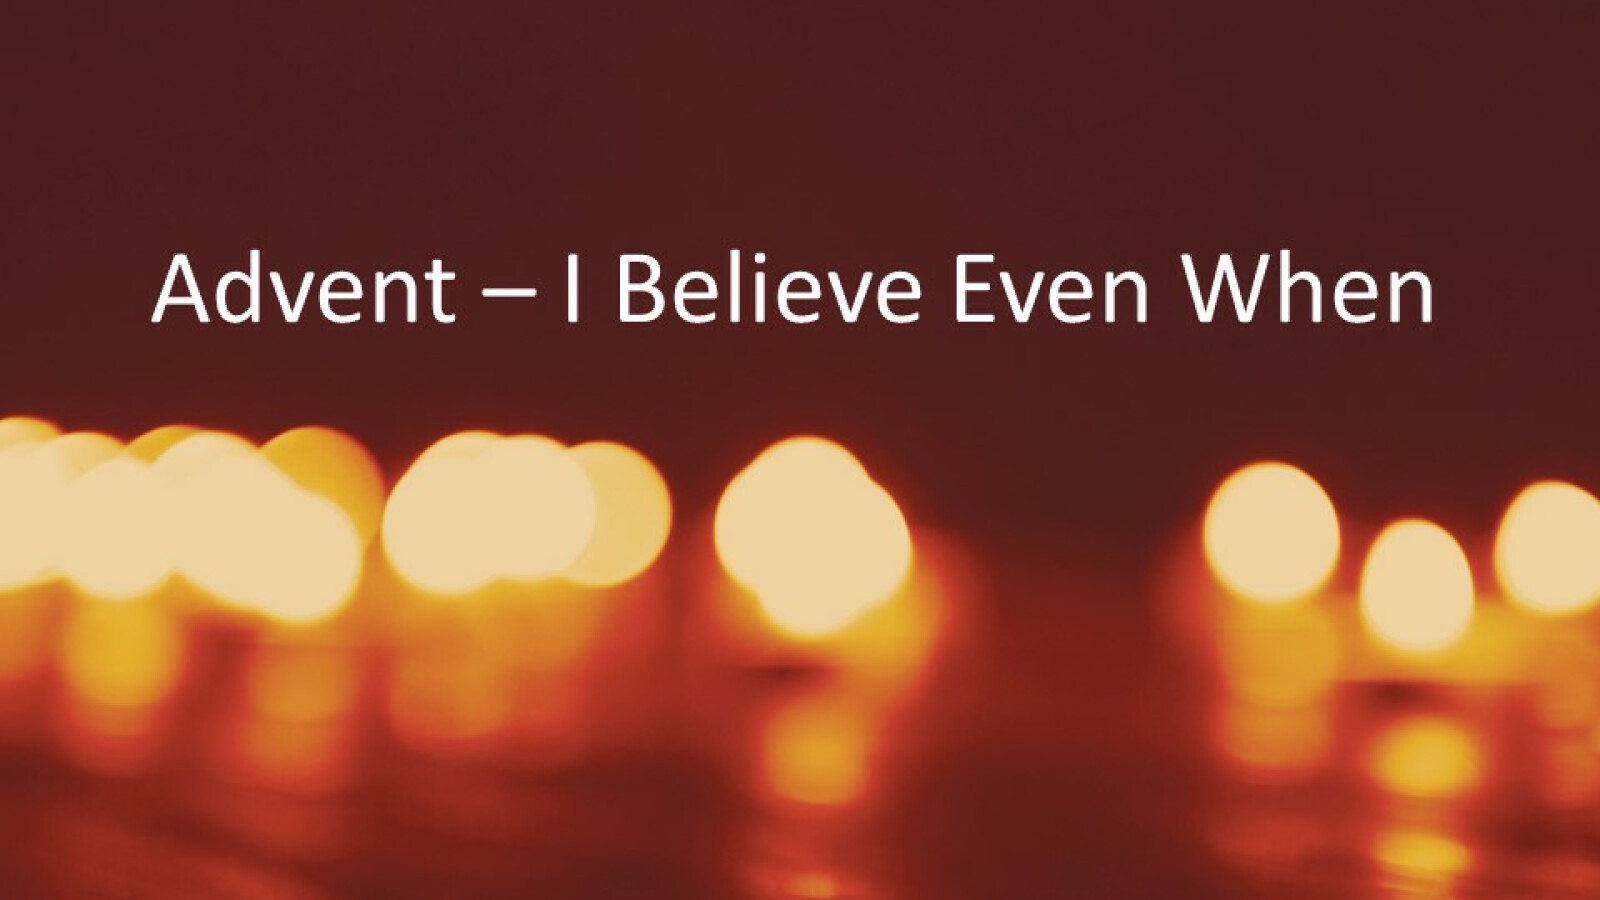 I Believe Even When